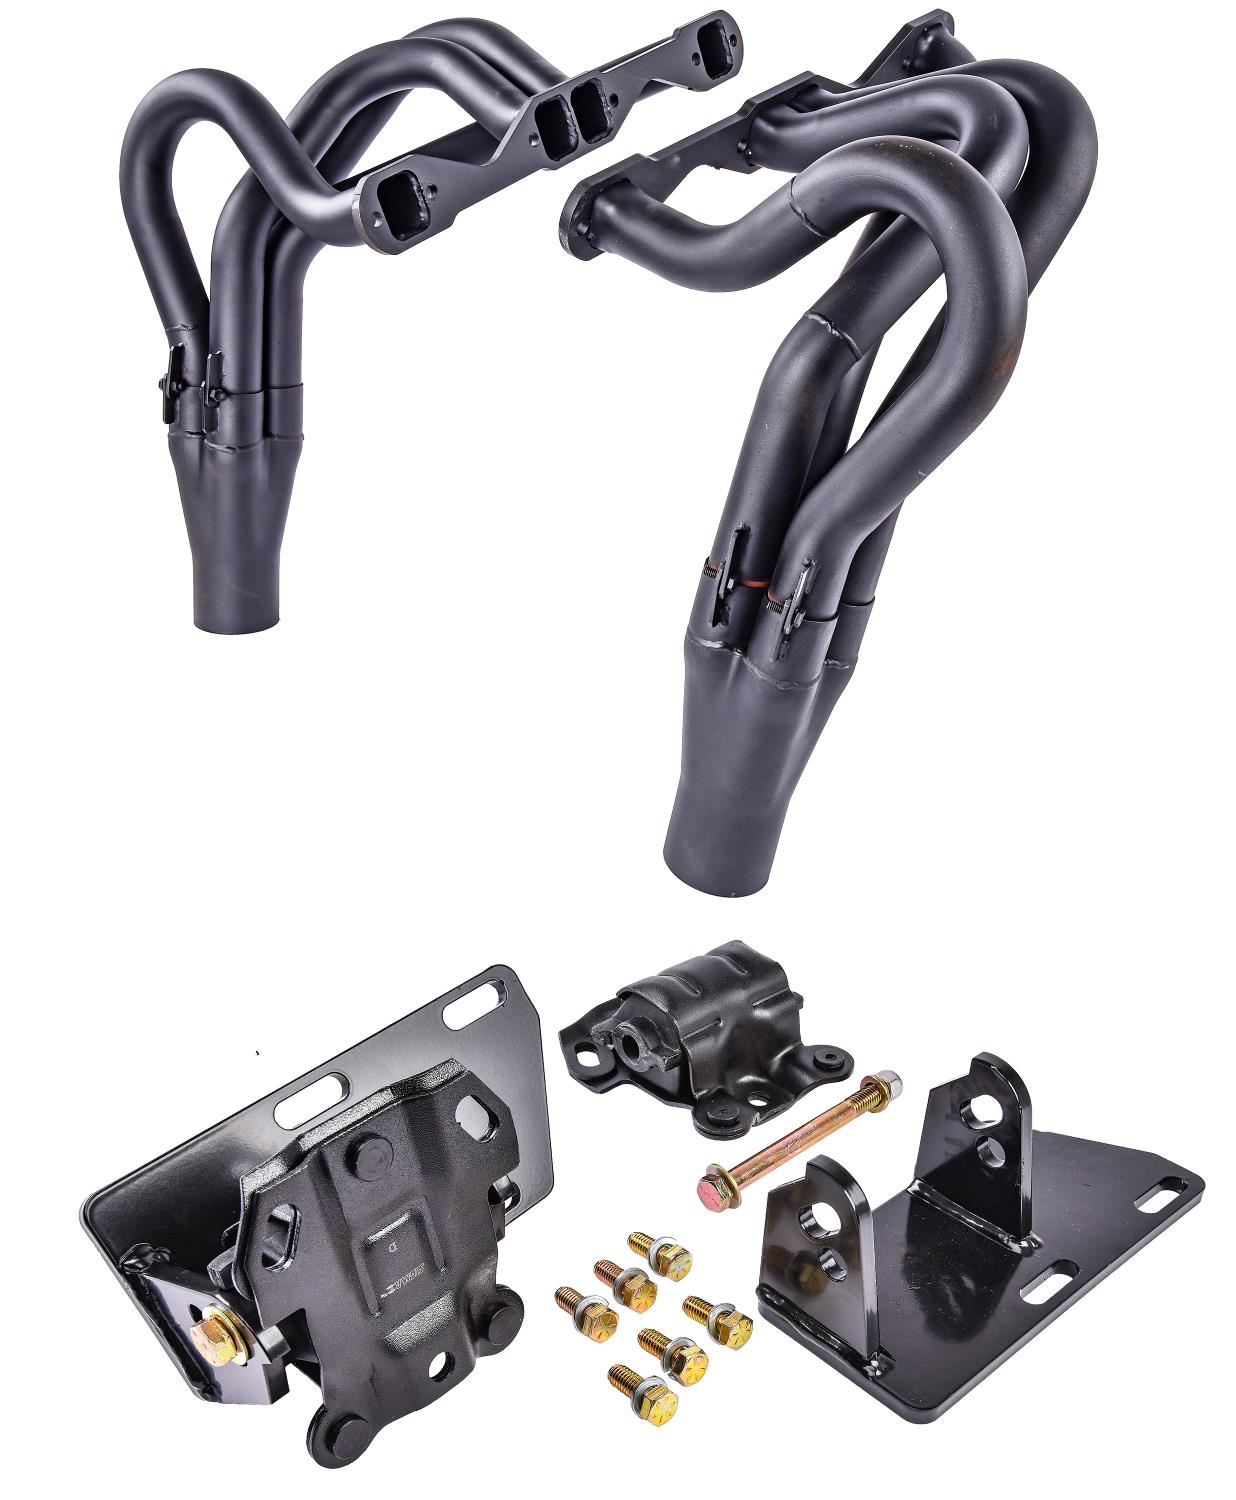 Engine Swap Motor Mounts and Header Kit for 1983-2004 GM S10 or S15 2WD [Small Block Chevy V8]